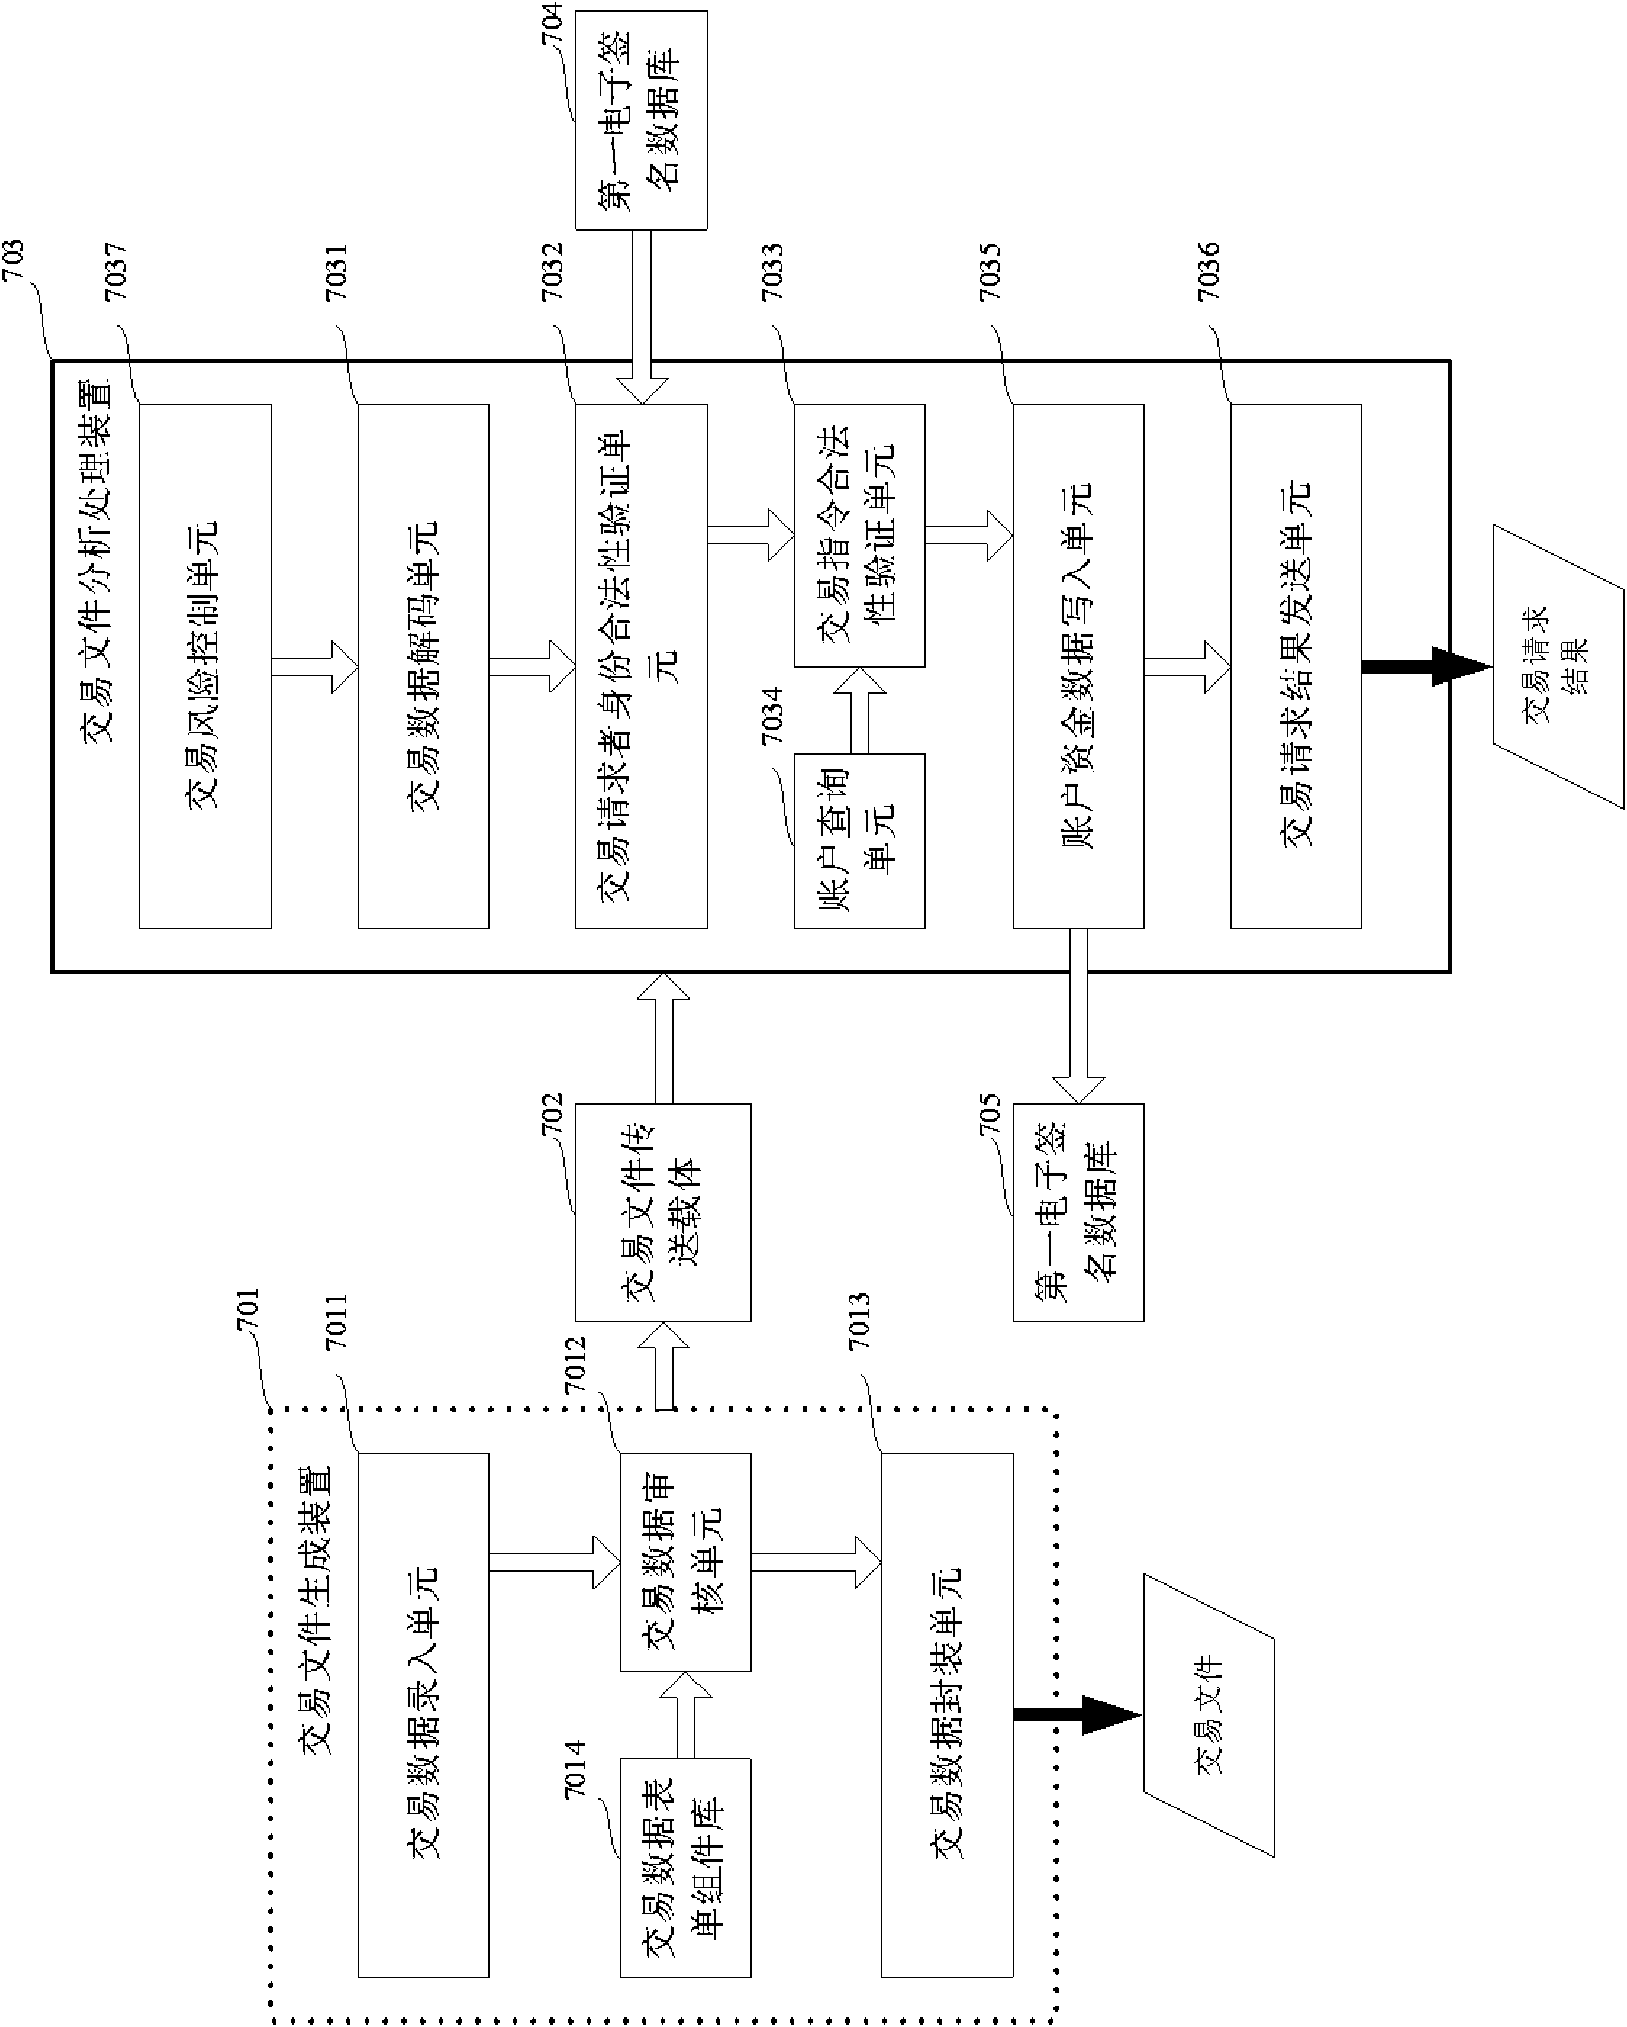 Method and system for processing electronic transaction request